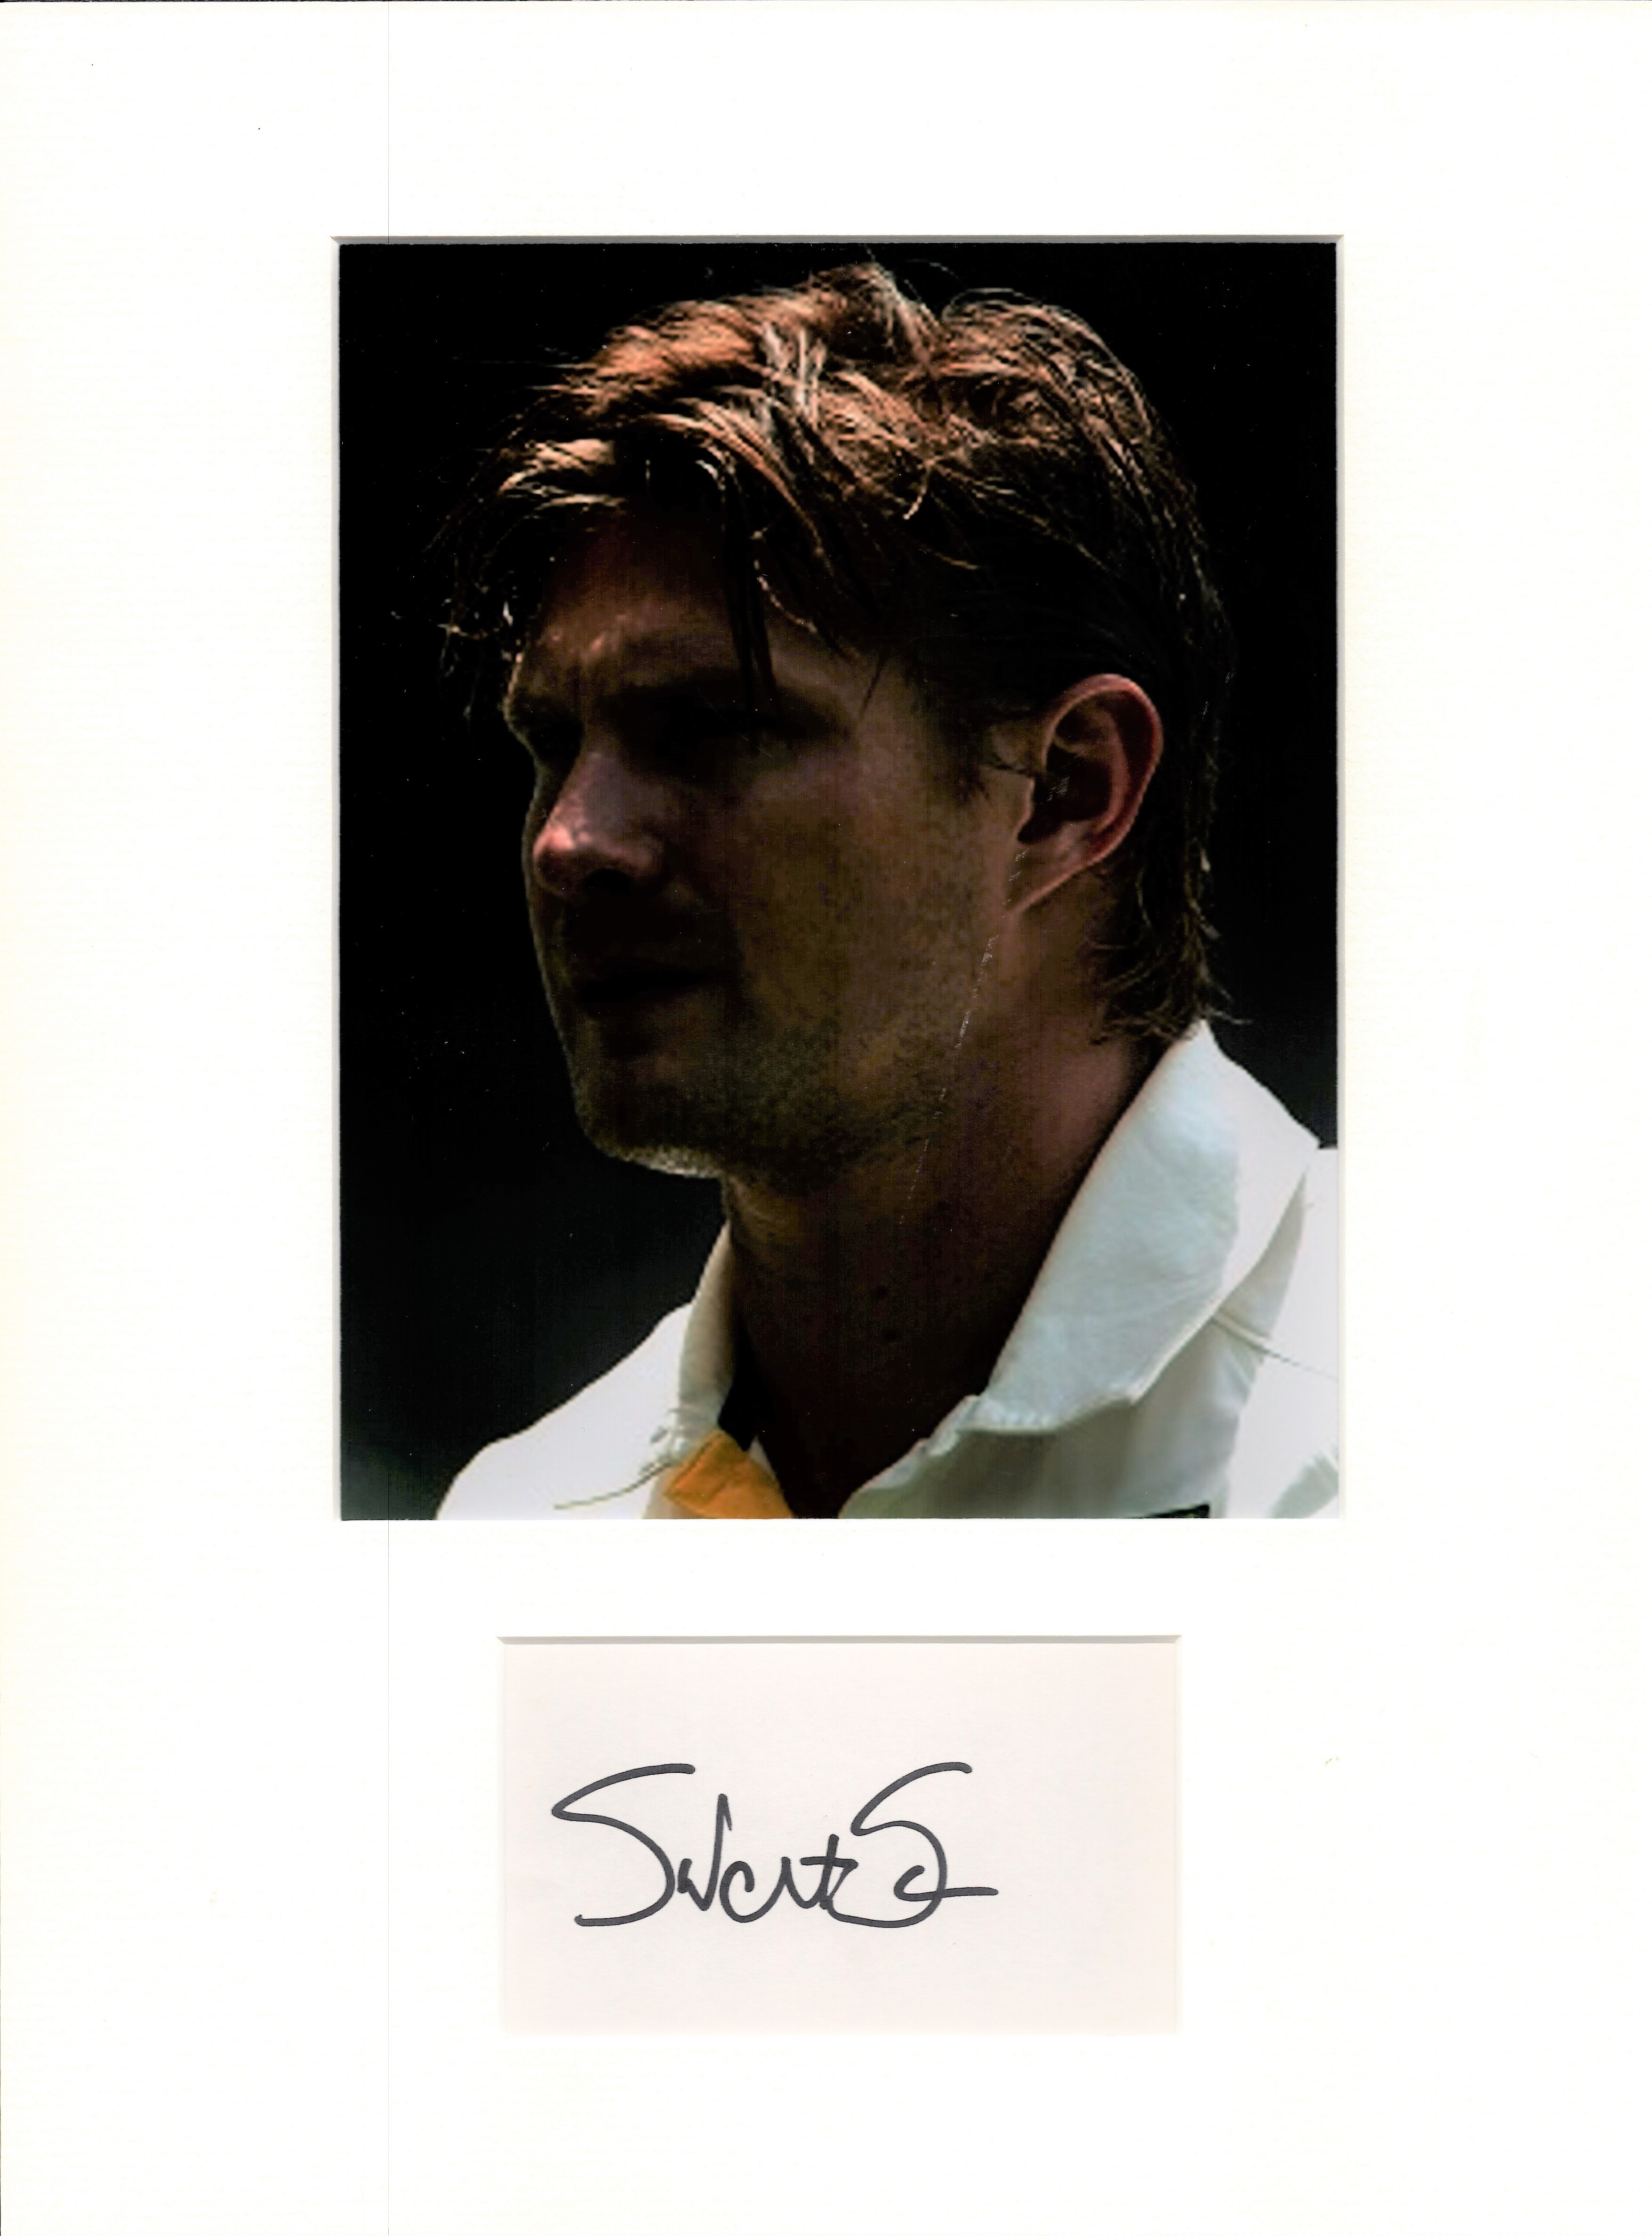 Cricket Shane Watson 16x12 overall mounted signature piece includes signed album page and a colour